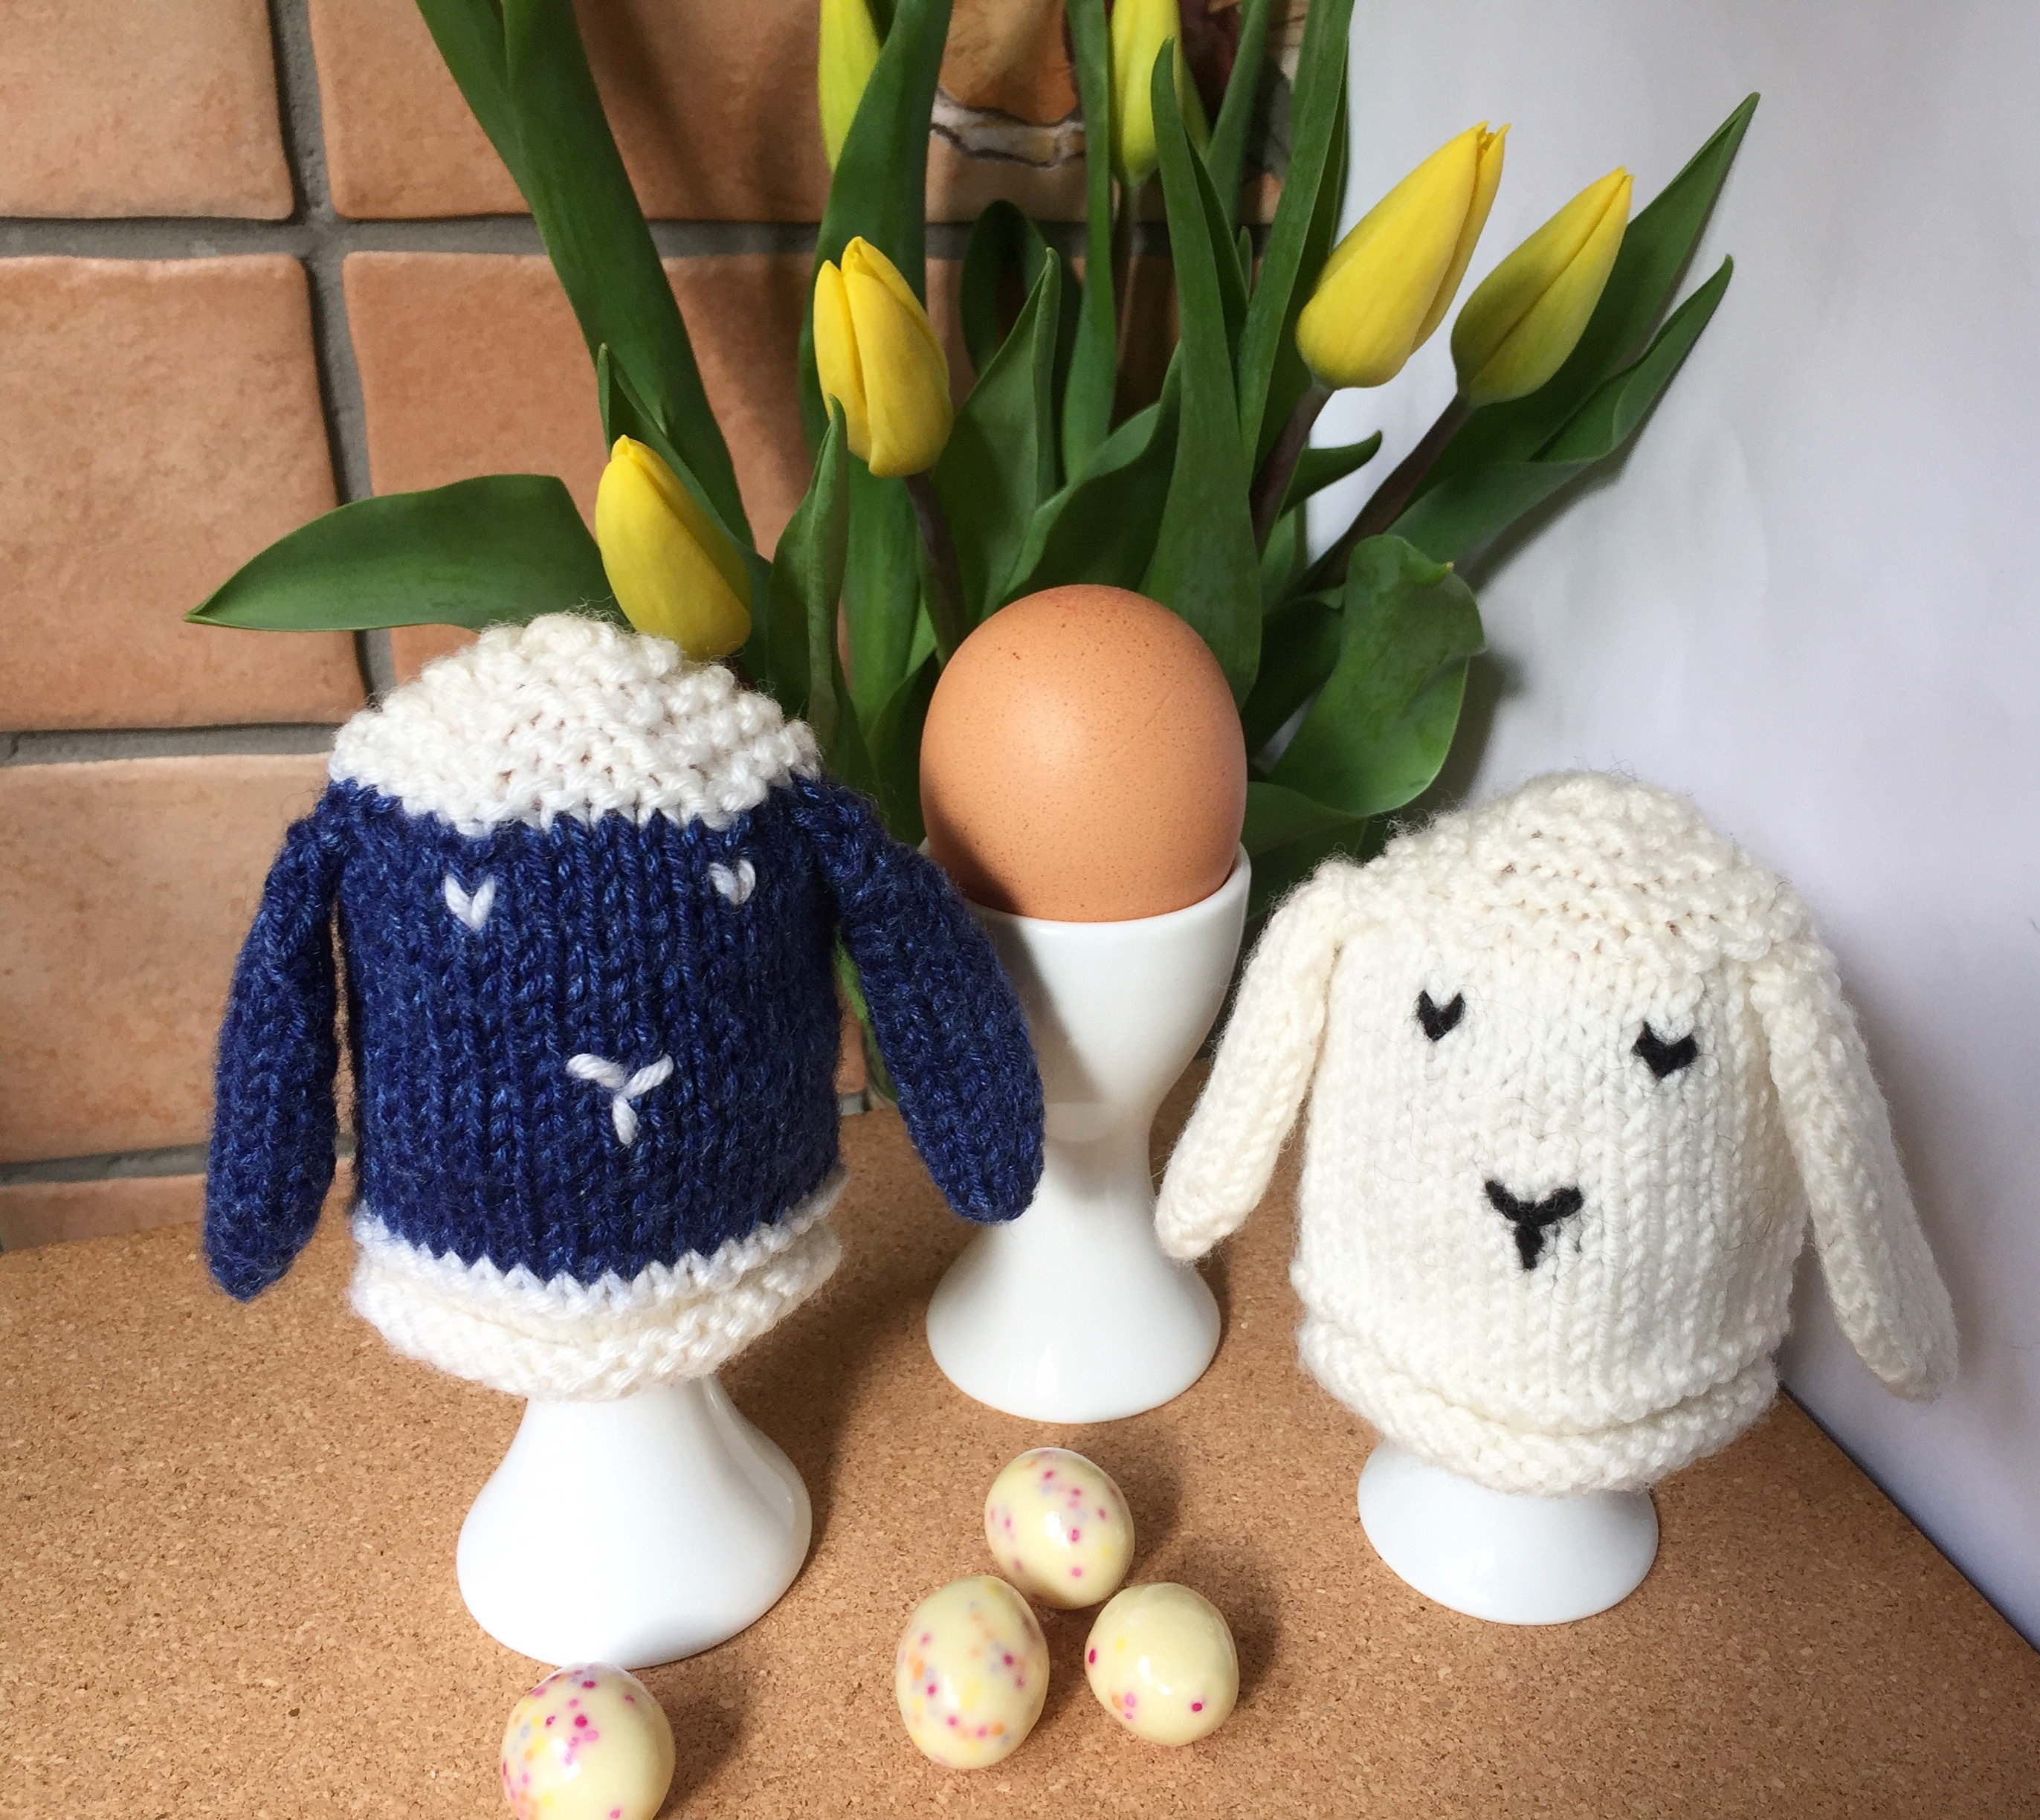 Egg Cosies Knitting Pattern Free Egg Cosy Knitting Pattern In Pdf Easter Sheep Egg Cosies Diy Homeware Pattern Easter Gift For Children Instant Download